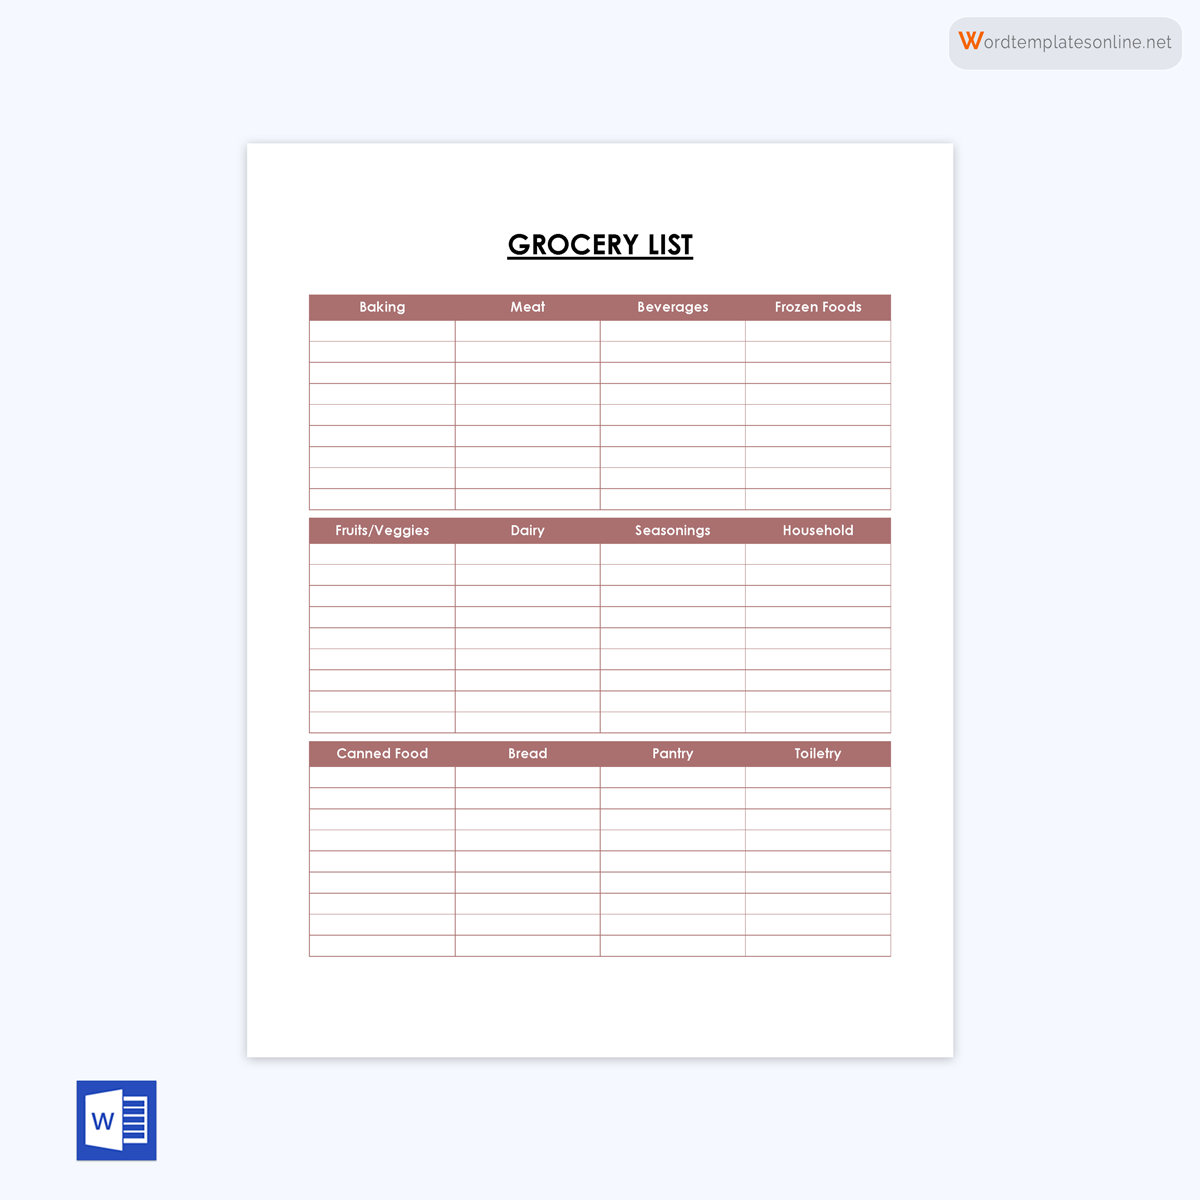 Sample Grocery List Template 05